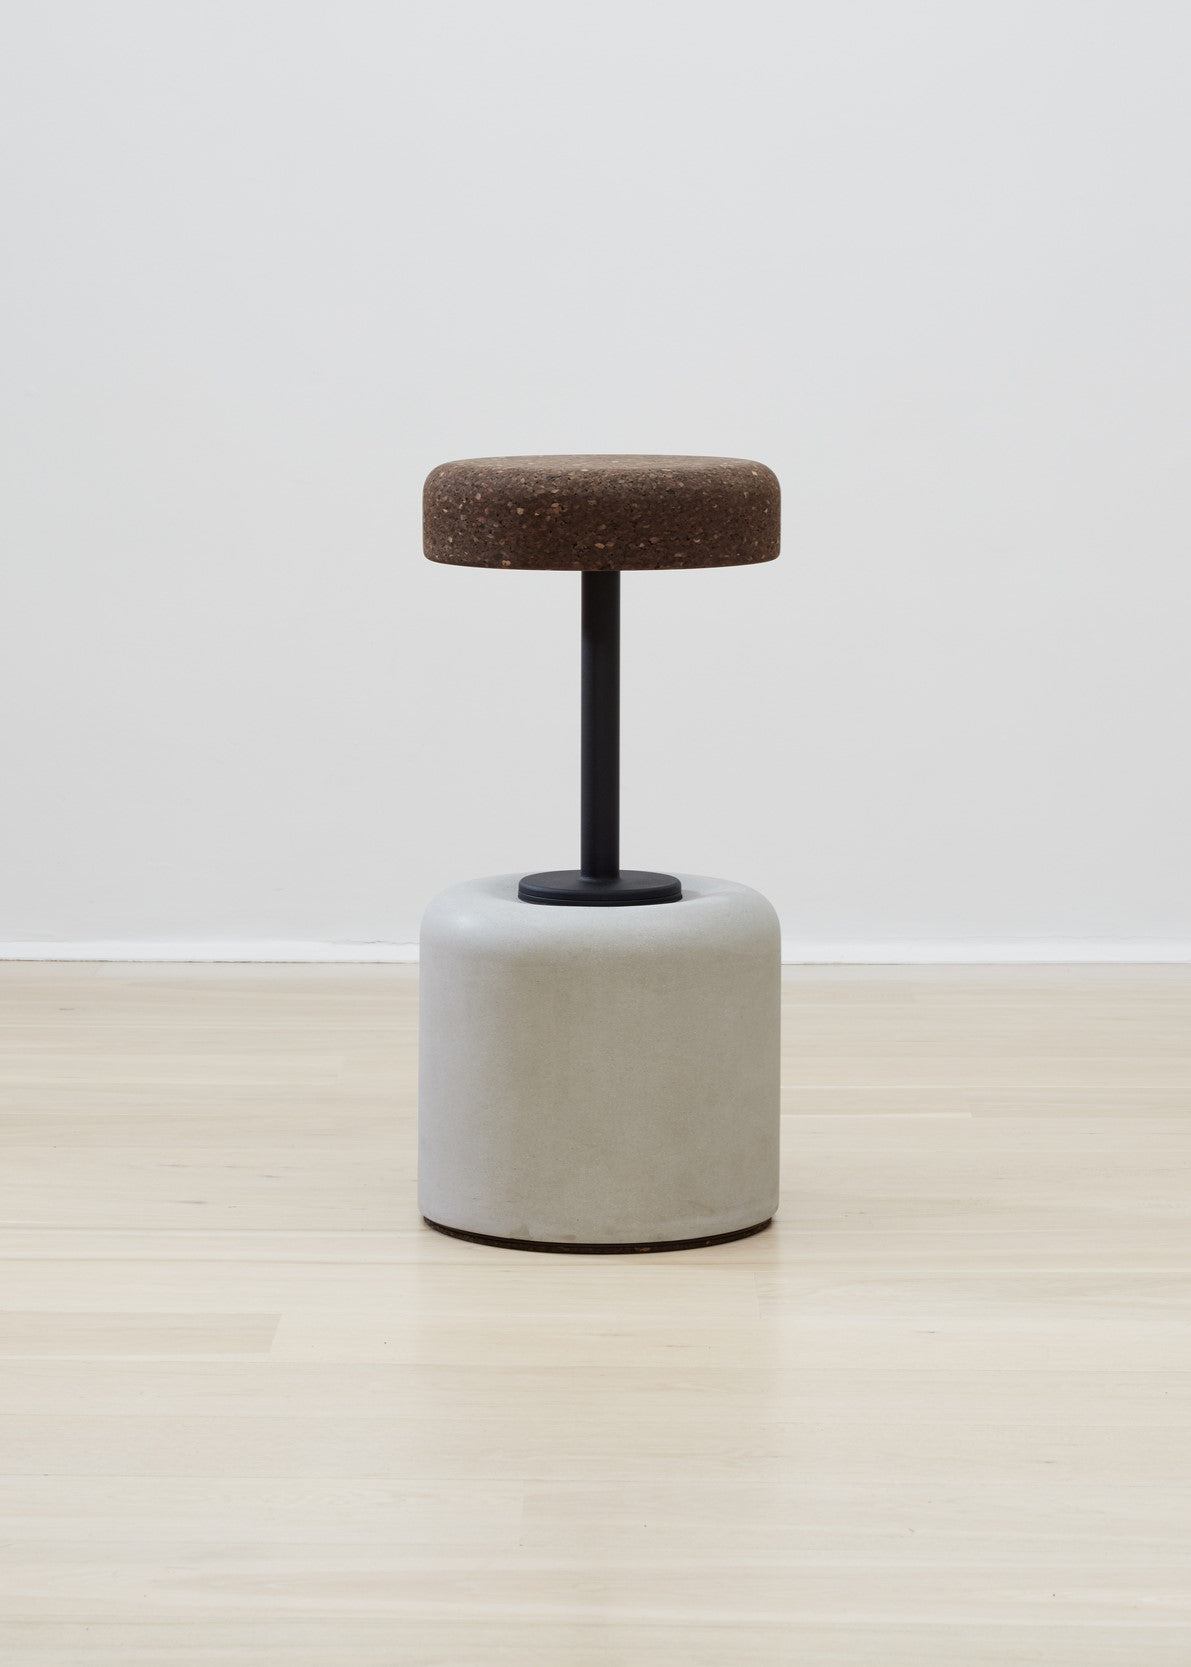 Elegant Wiid Cork and Concrete Bar Stools featuring a natural grey base paired with a dark cork seat, epitomizing modern sustainable design. This unique combination offers both aesthetic appeal and functional durability, making it a perfect addition to any contemporary kitchen or bar setting that values eco-friendly, high-quality furniture